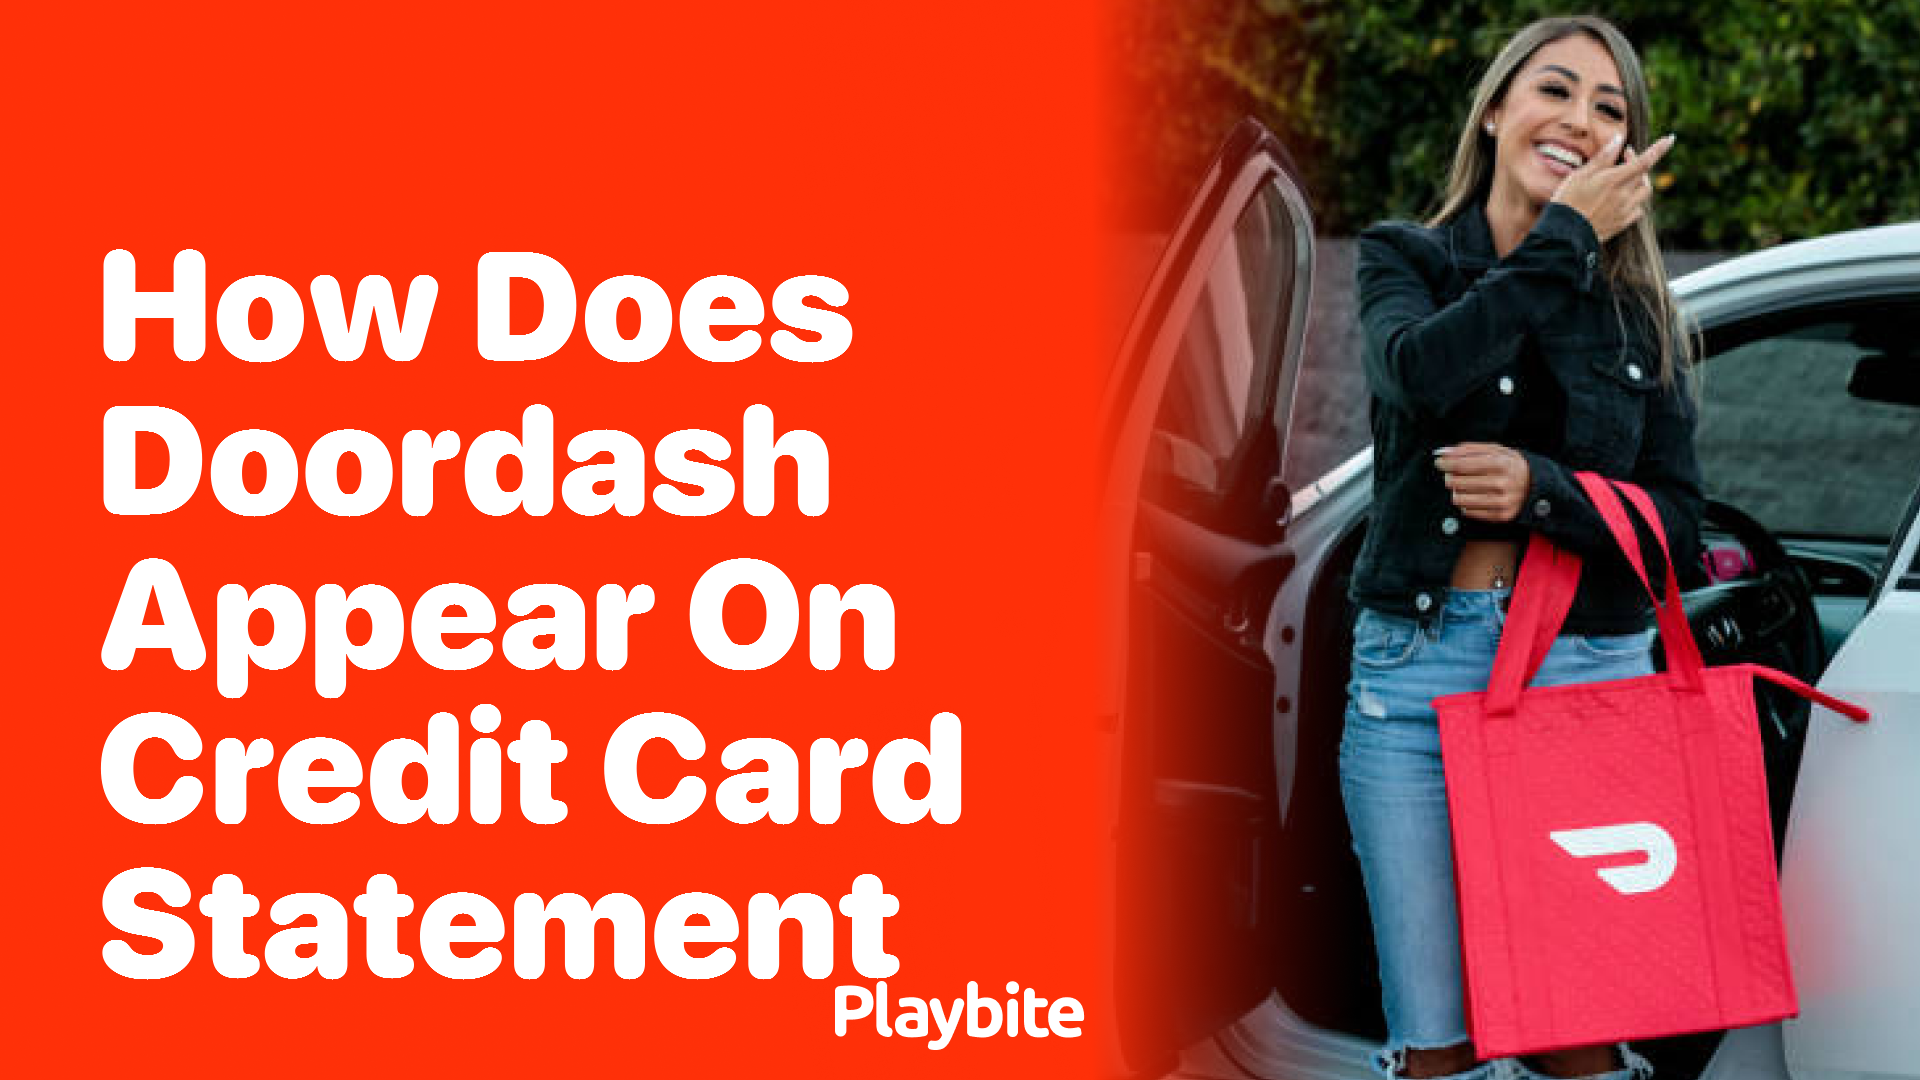 How Does DoorDash Appear on Your Credit Card Statement?